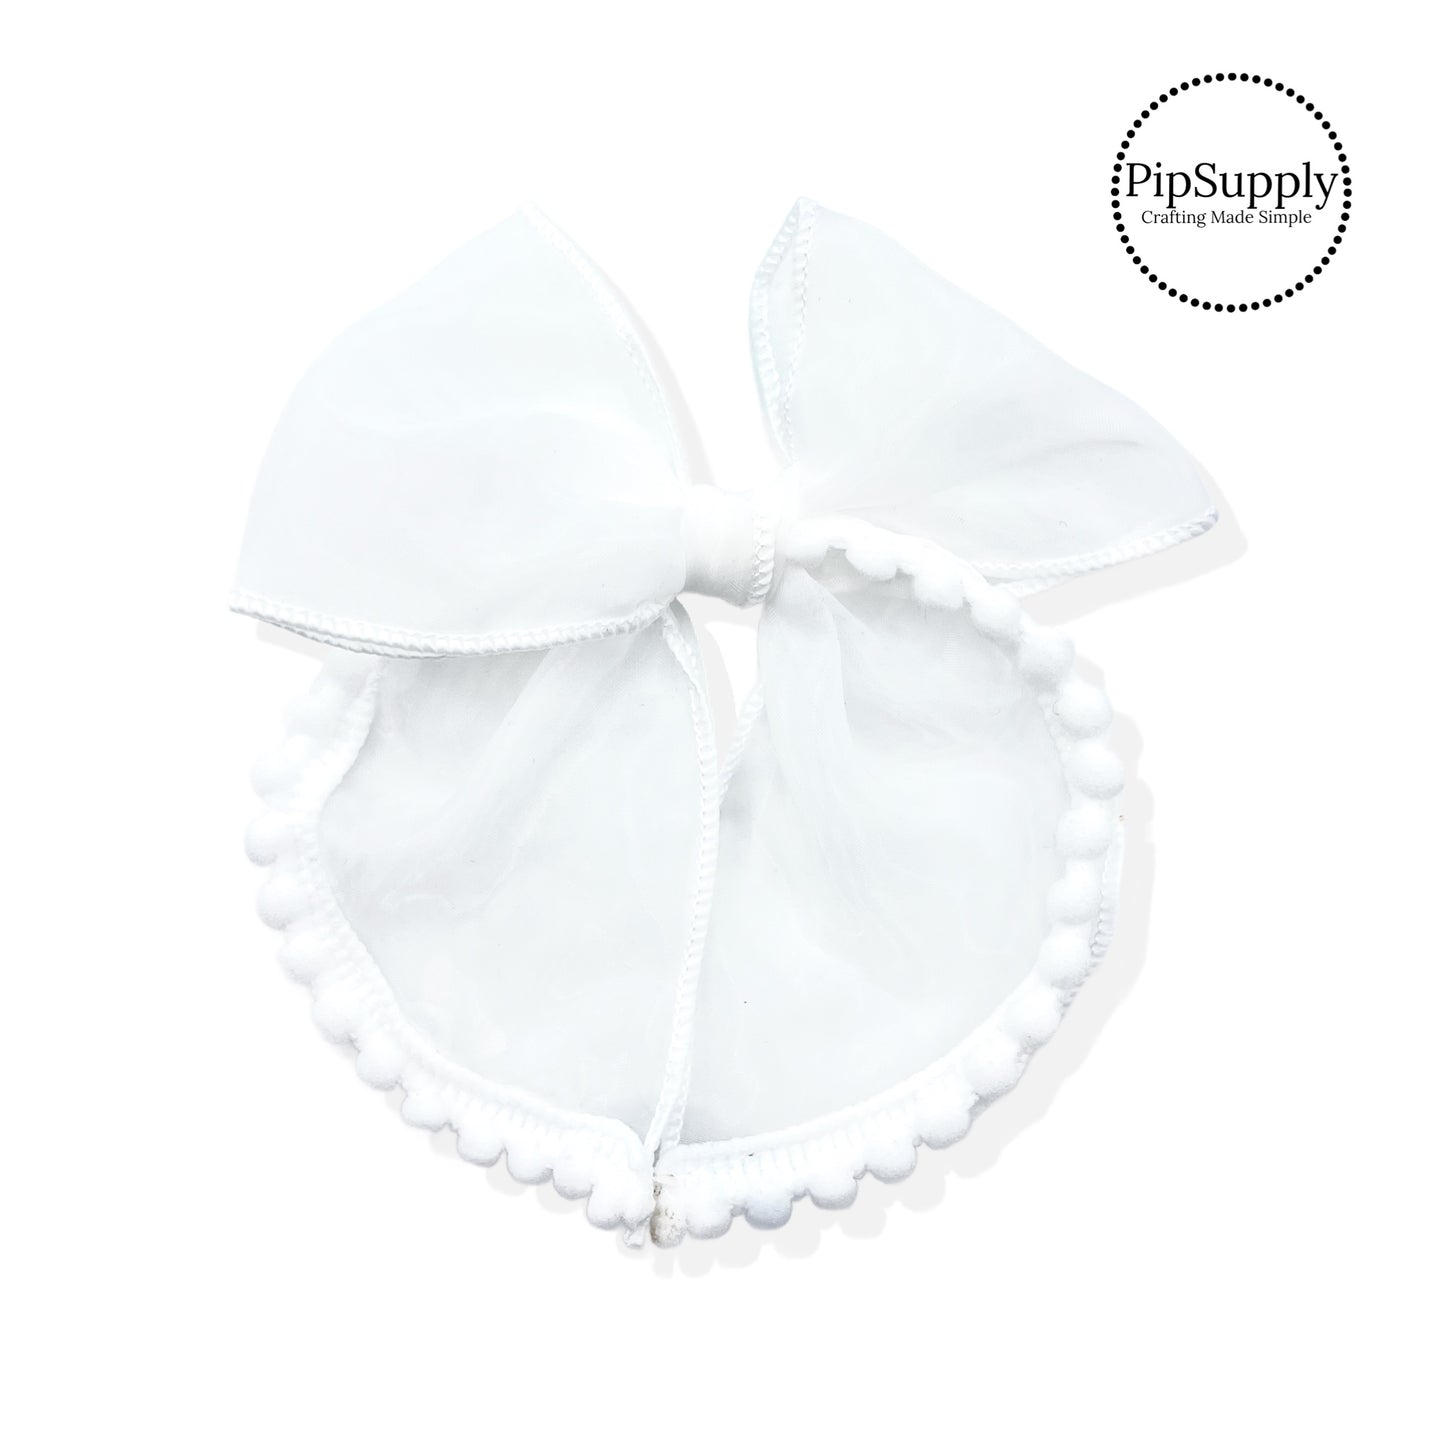 These summer hair bow strips are ready to package and resell to your customers no sewing or measuring necessary! Just fill with any sequins and clays, tie and add them to any clip or hair tie. These pre-tied bows feature a cute pom pom trim.